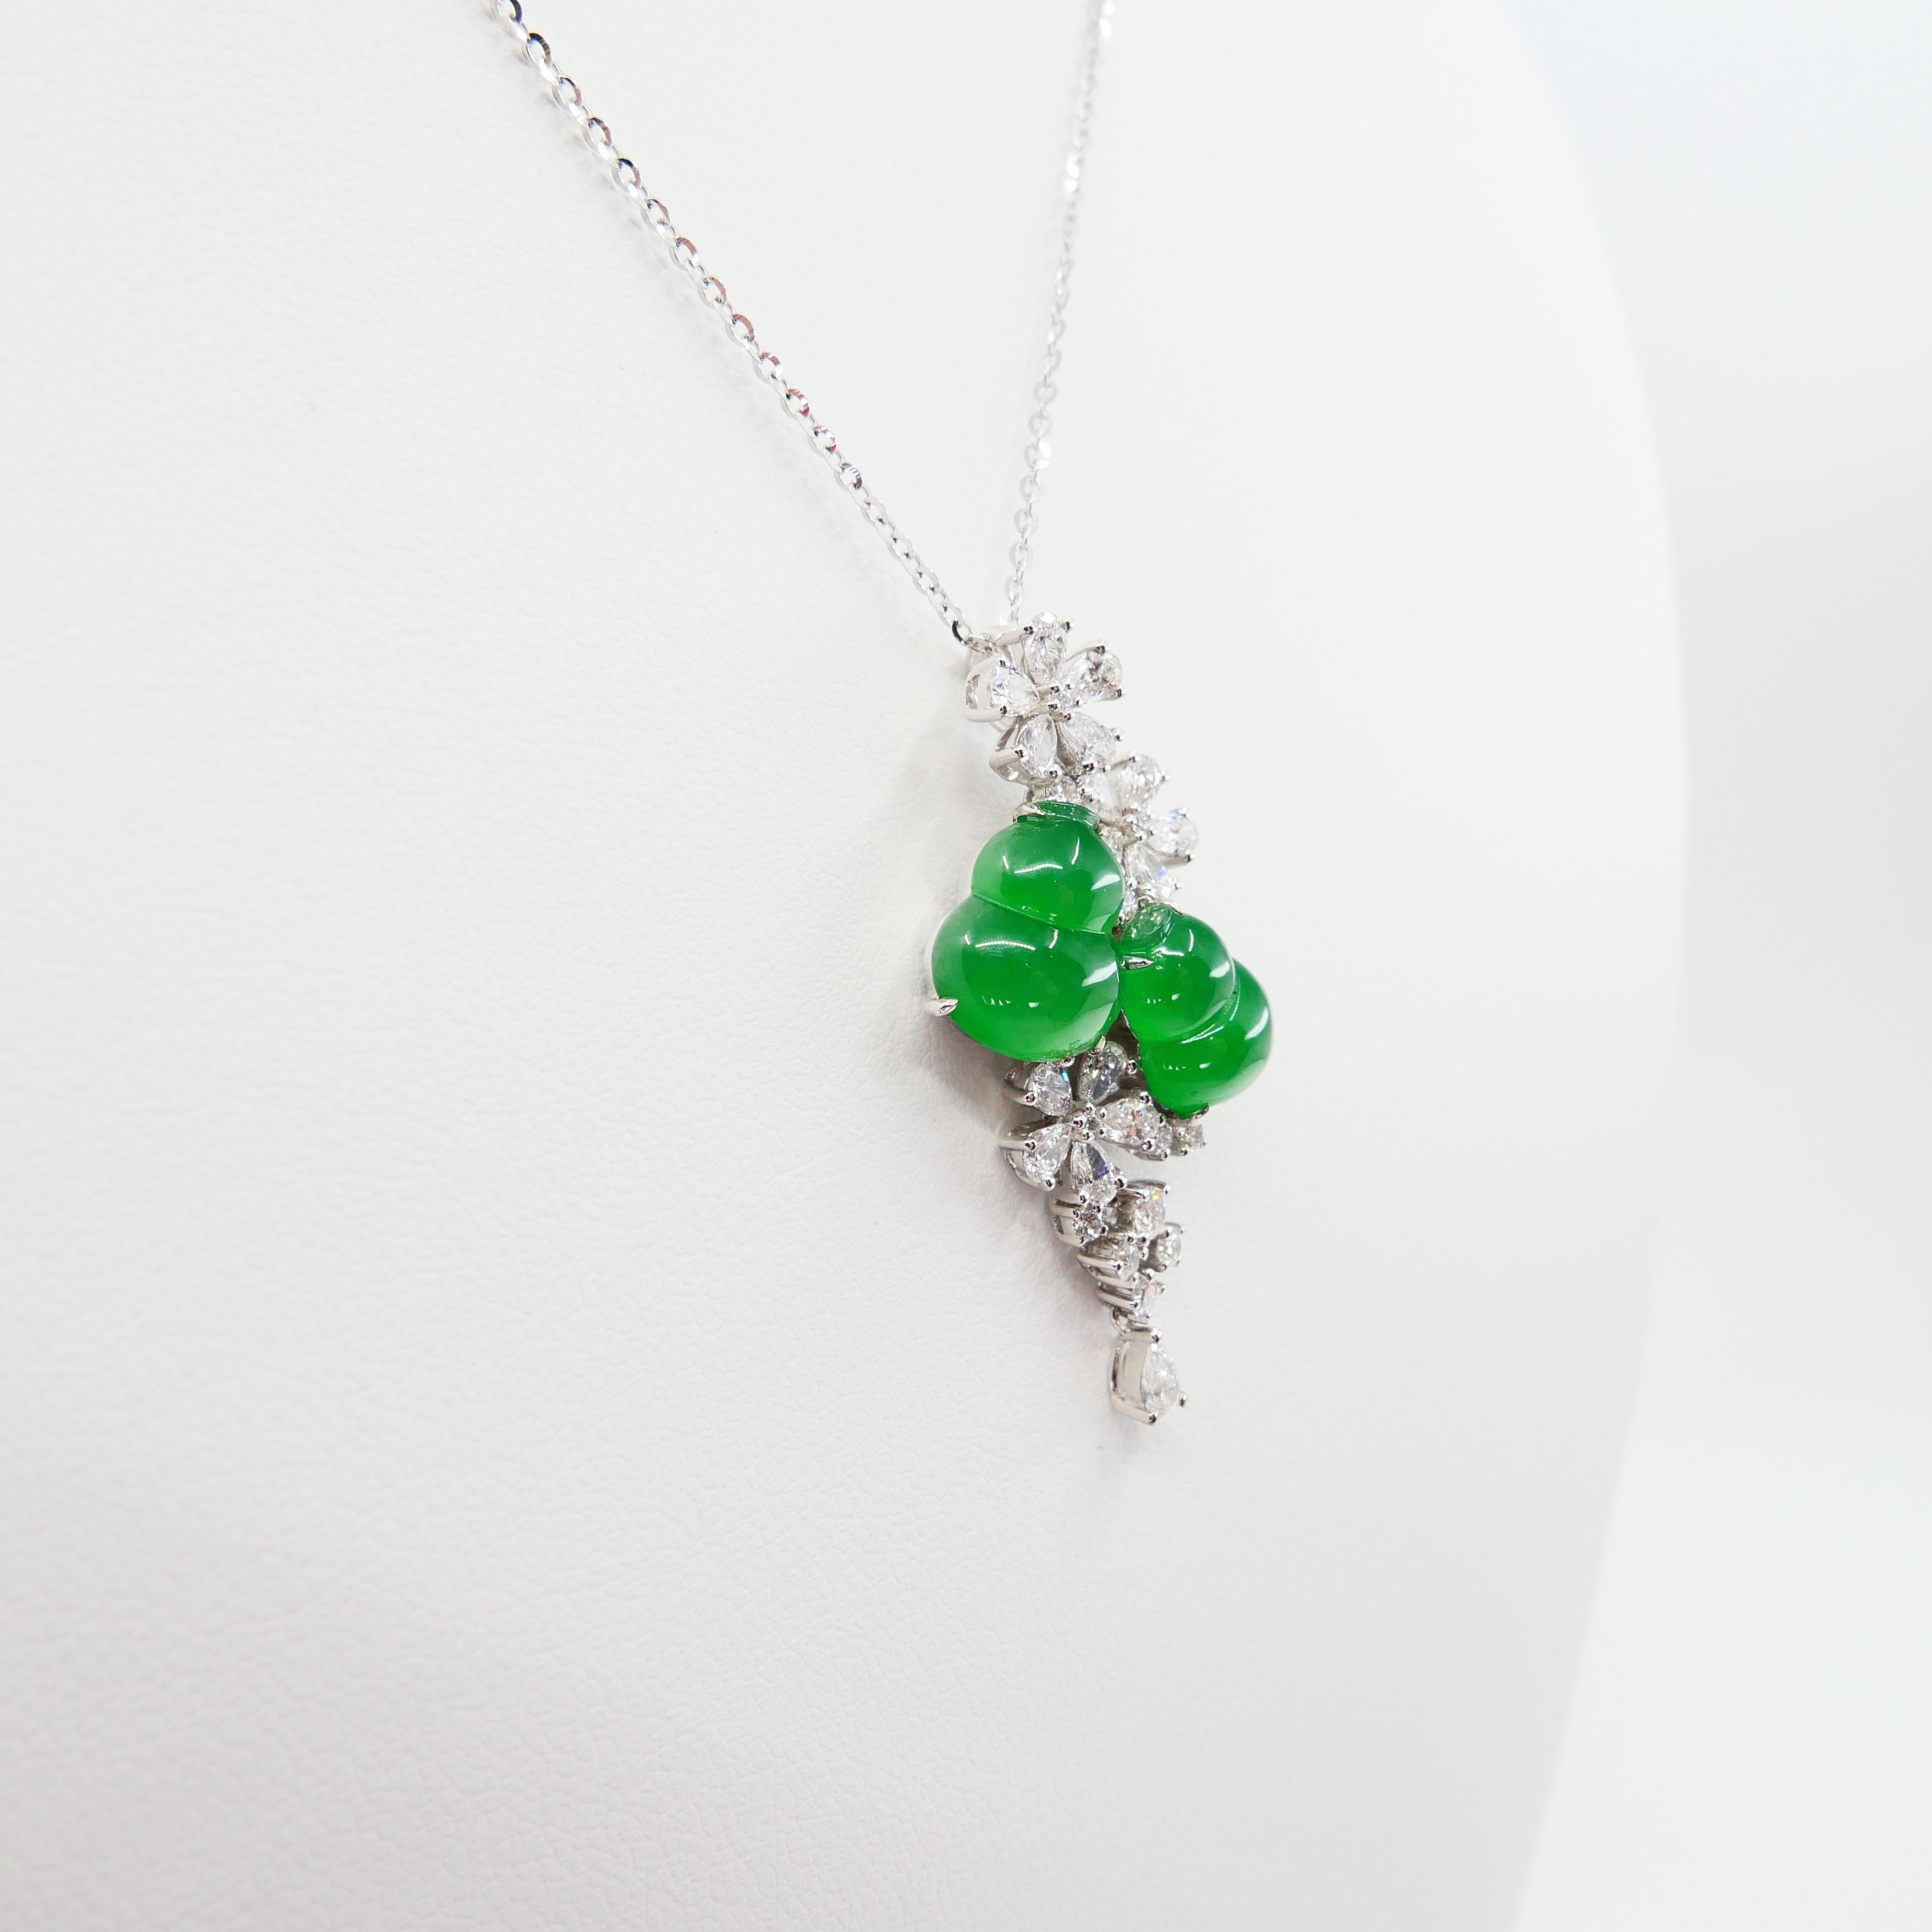 Certified Type A Icy Jade Gourd Diamond Pendant Necklace, Intense Apple Green For Sale 4